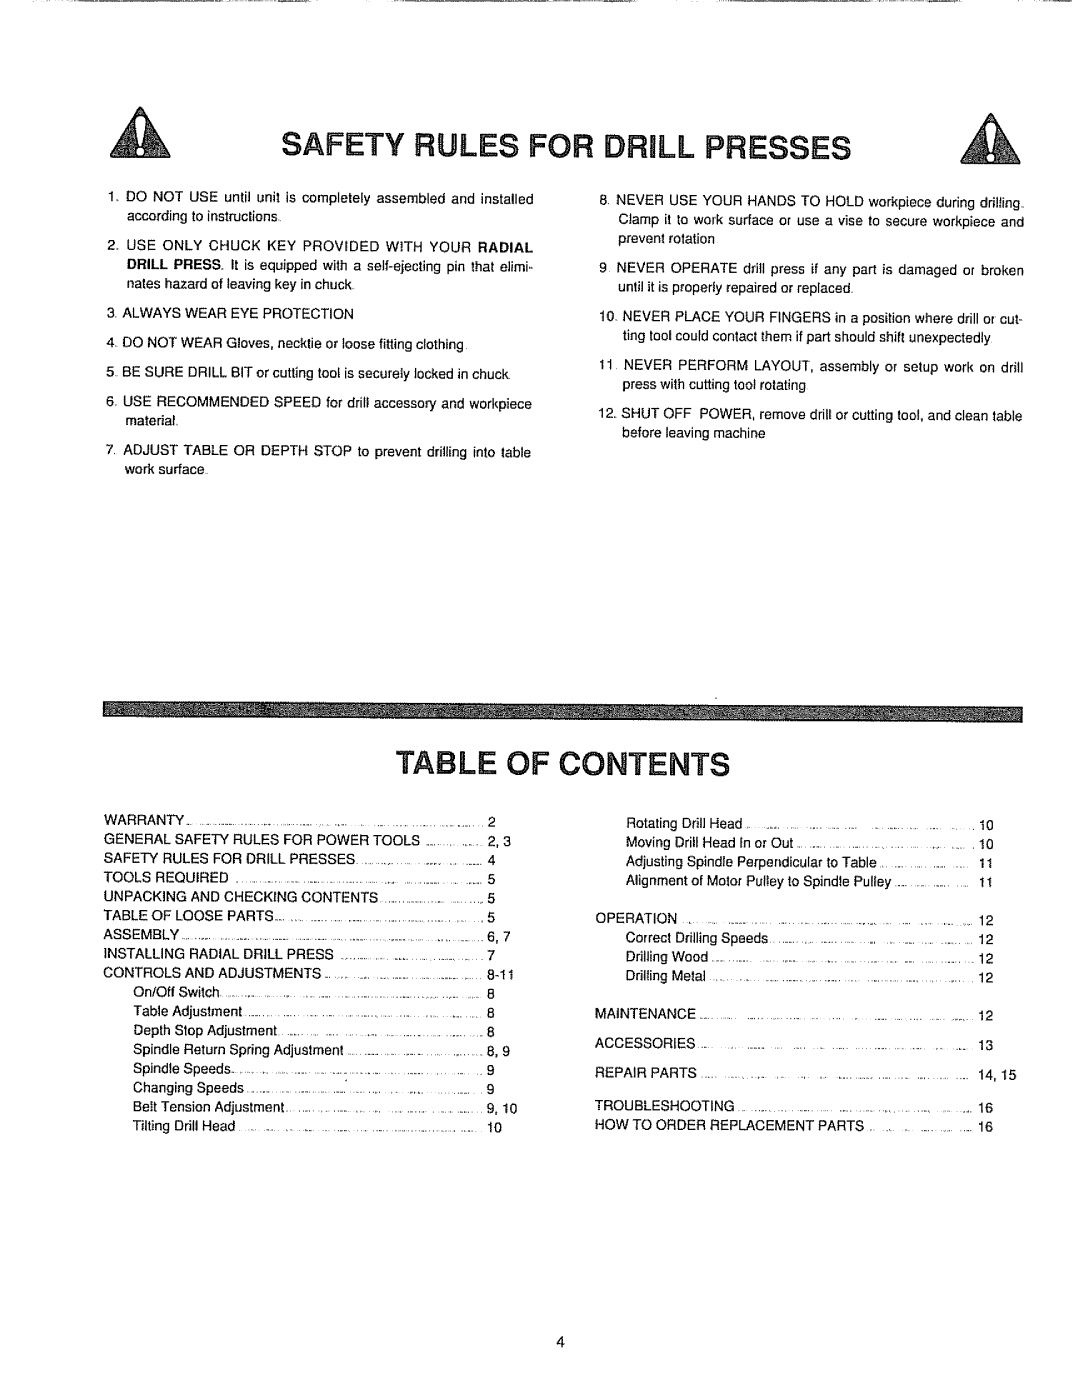 Sears 149.213340 warranty Safety Rules For Drill Presses, Table Of Contents, 8-11 